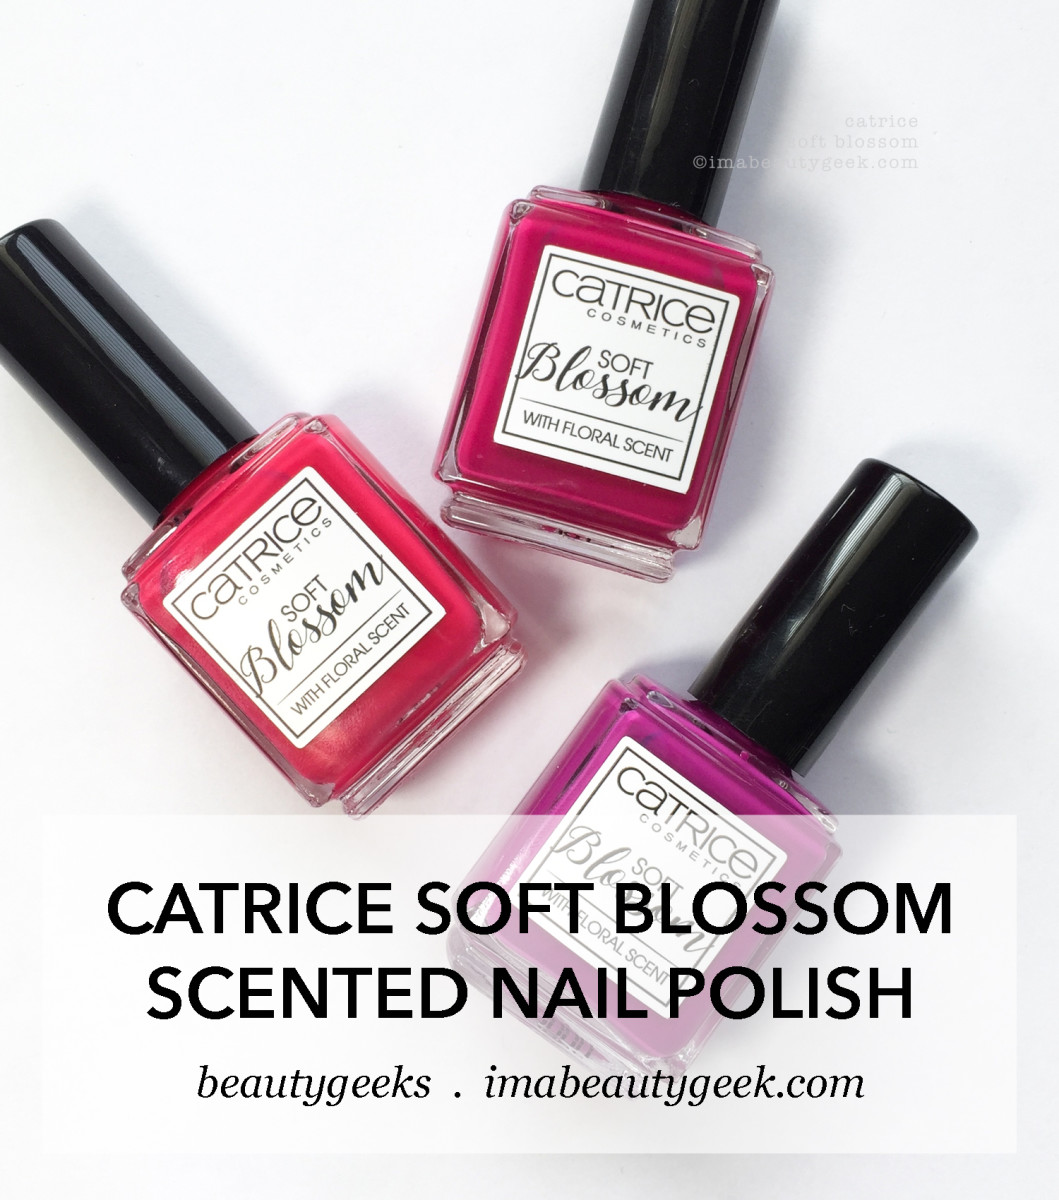 Catrice Soft Blossom Scented Nail Polish Swatches 2017